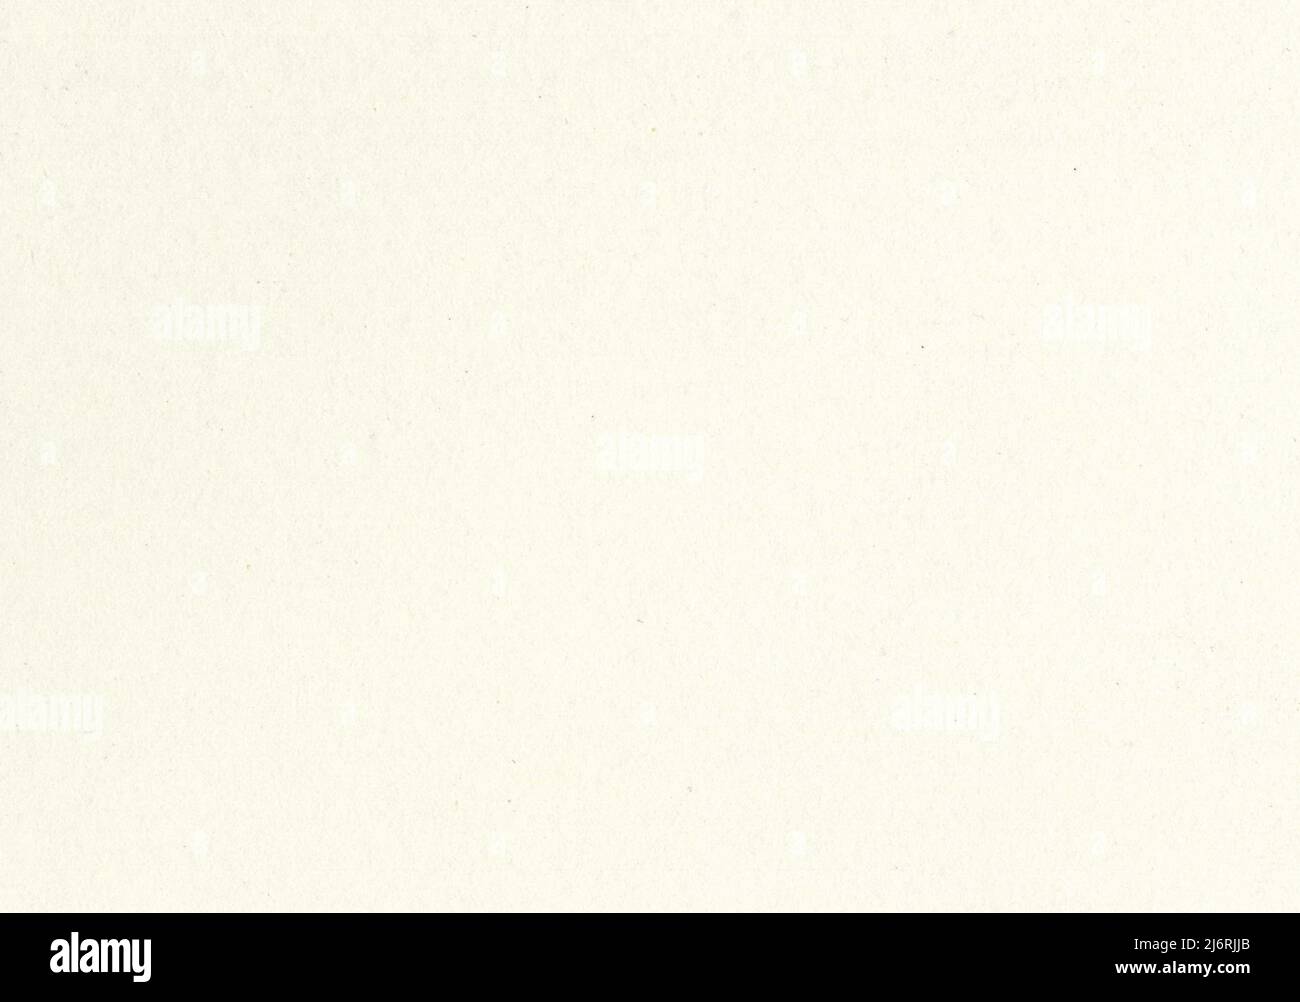 High resolution great zoom close up old light beige paper texture background scan with fine grain fiber and dust particles smooth uncoated aged paper Stock Photo